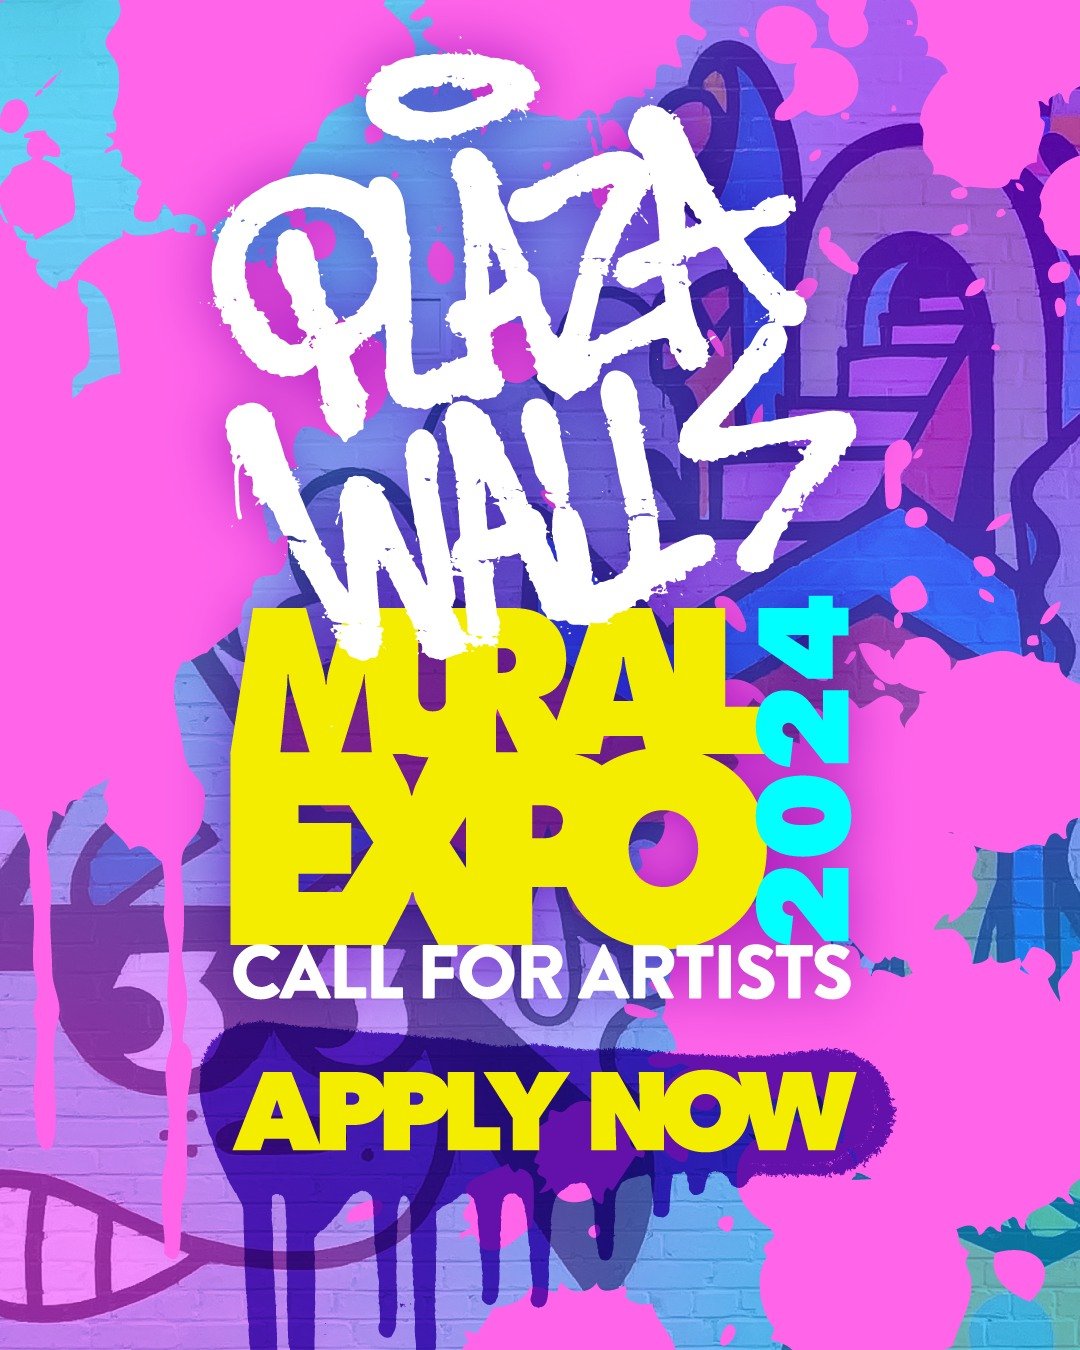 😎 HAPPY MURAL MONDAY!!! 😎
Artists, ready to make your mark at Plaza Walls? 🎨💪 Applications are NOW OPEN - LINK IN BIO 💥 APPLY SOON the application WILL CLOSE APRIL 30th at midnight!!!

Join us as we celebrate 9 years of public art:
🔸 Sep 28th -